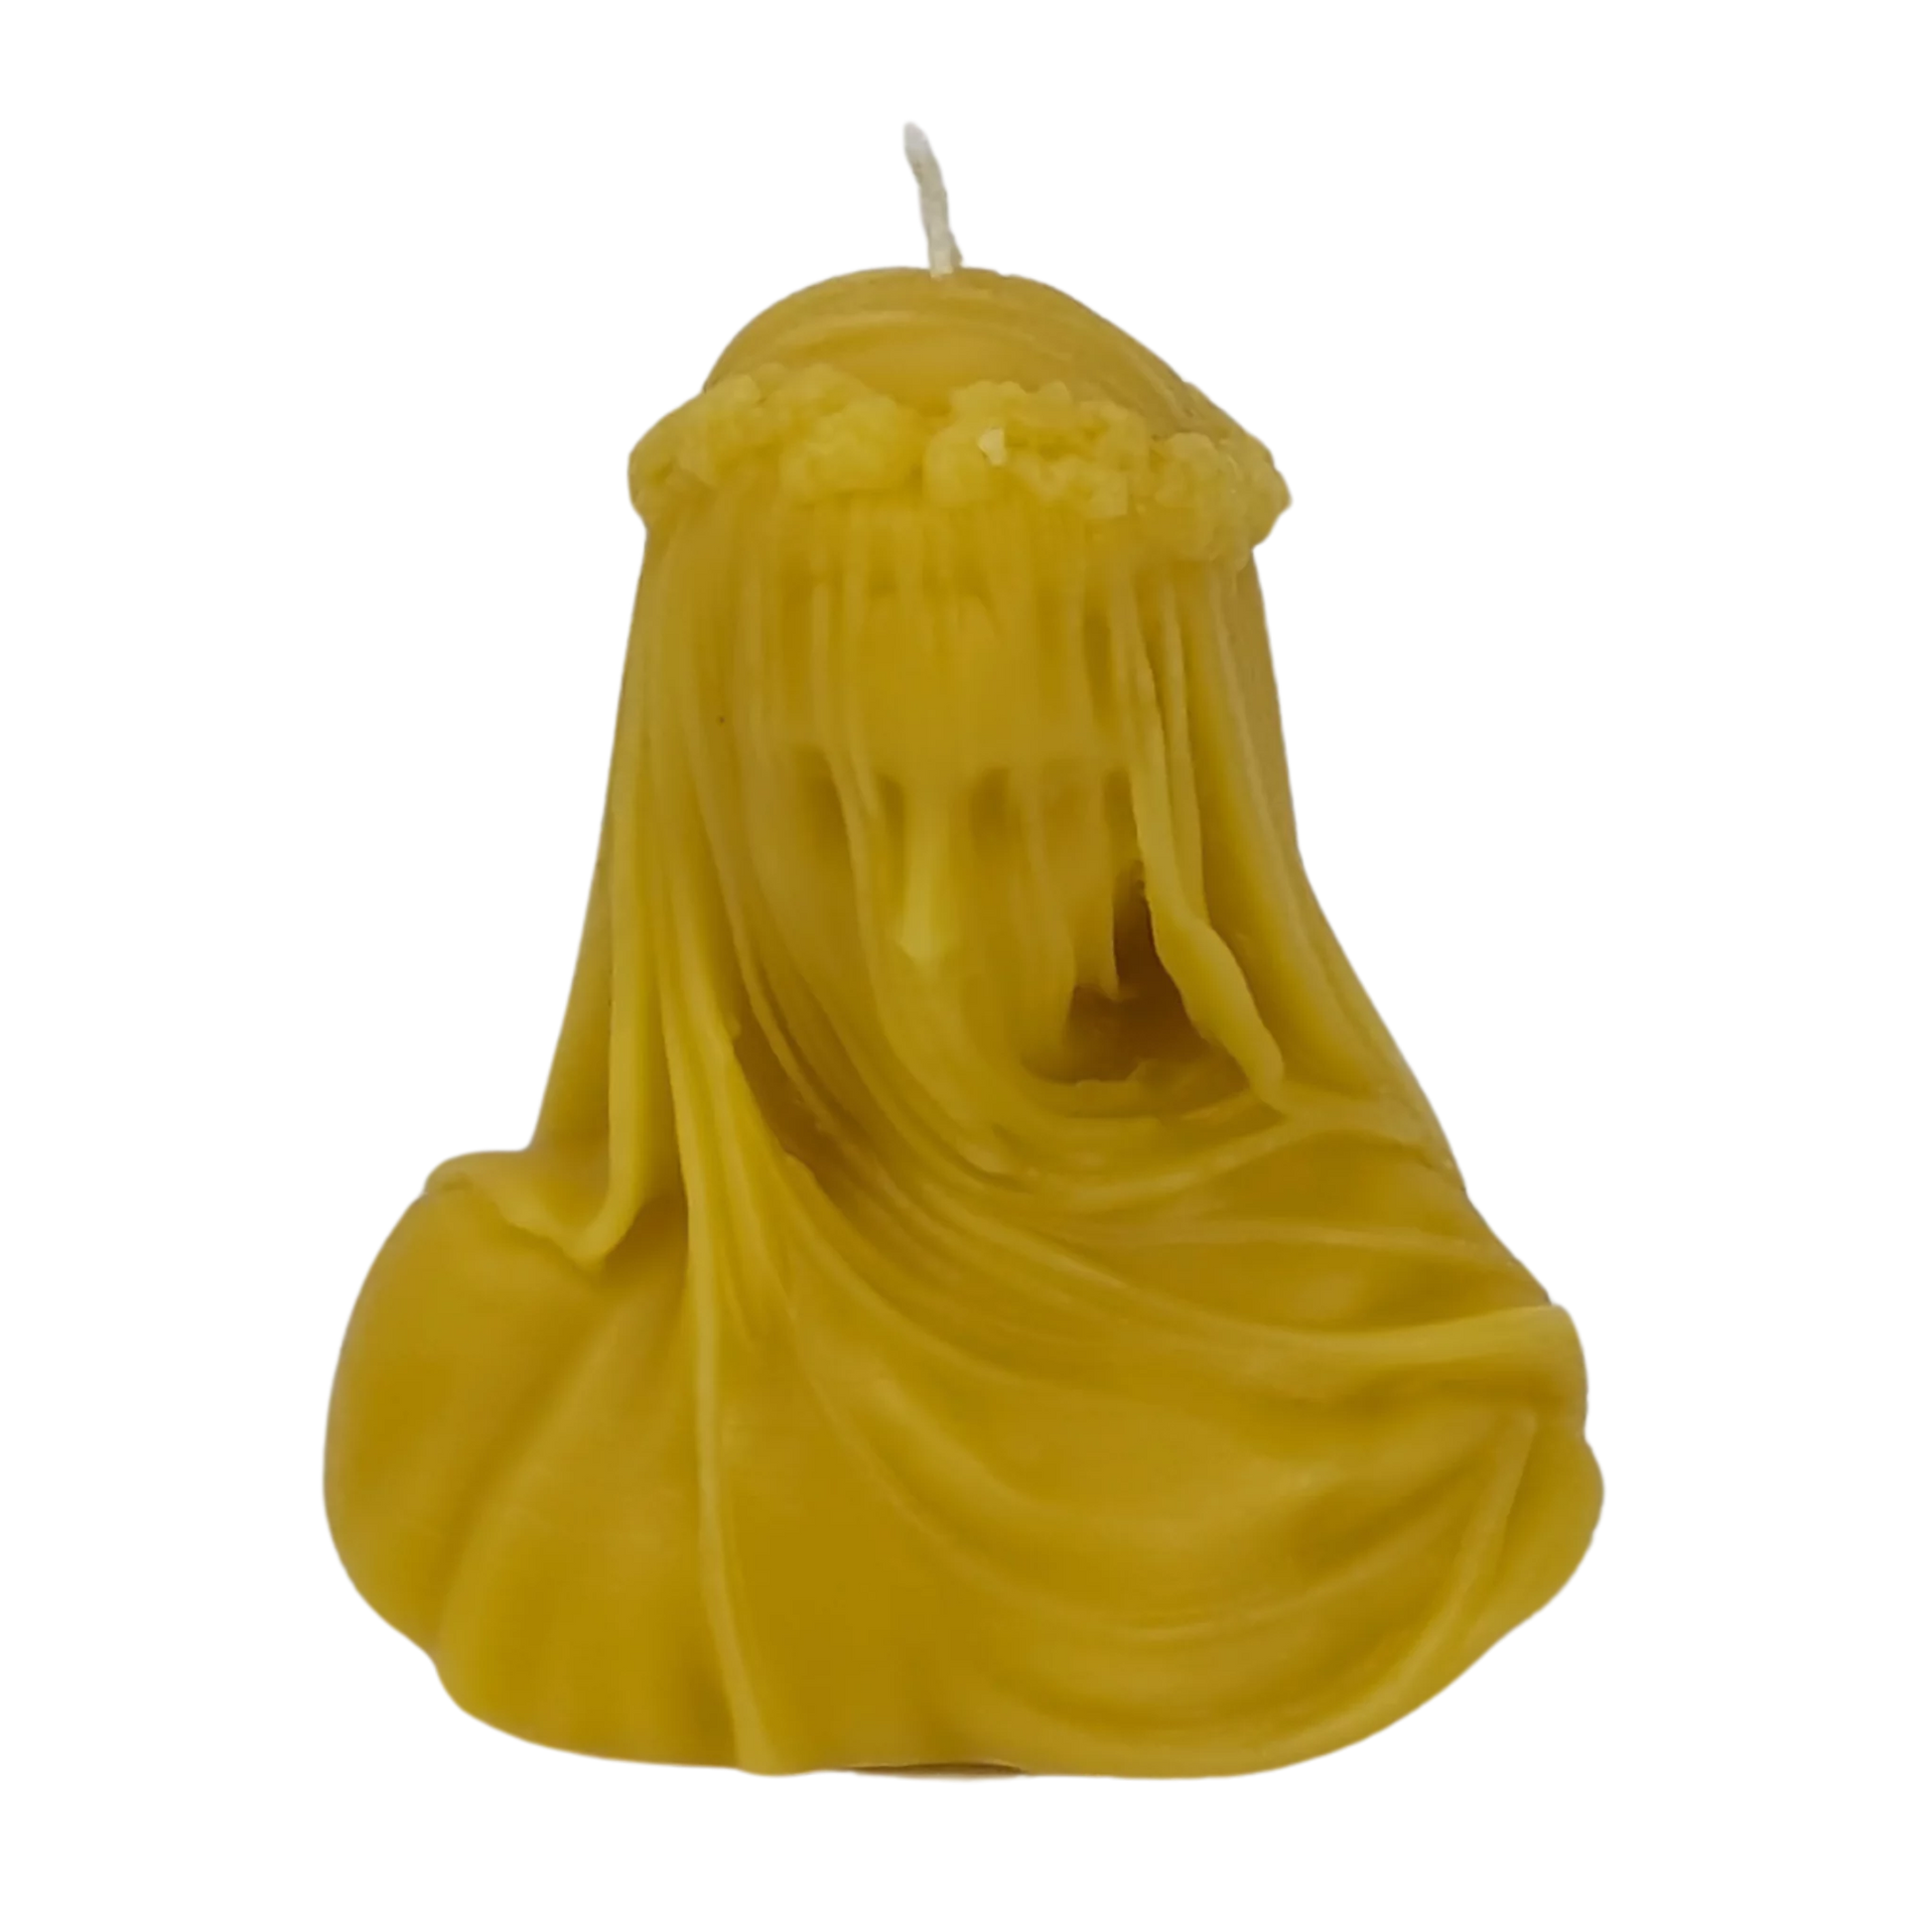 Art-inspired beeswax candle shaped as a veiled lady, adding a touch of mystery and history to your home decor.